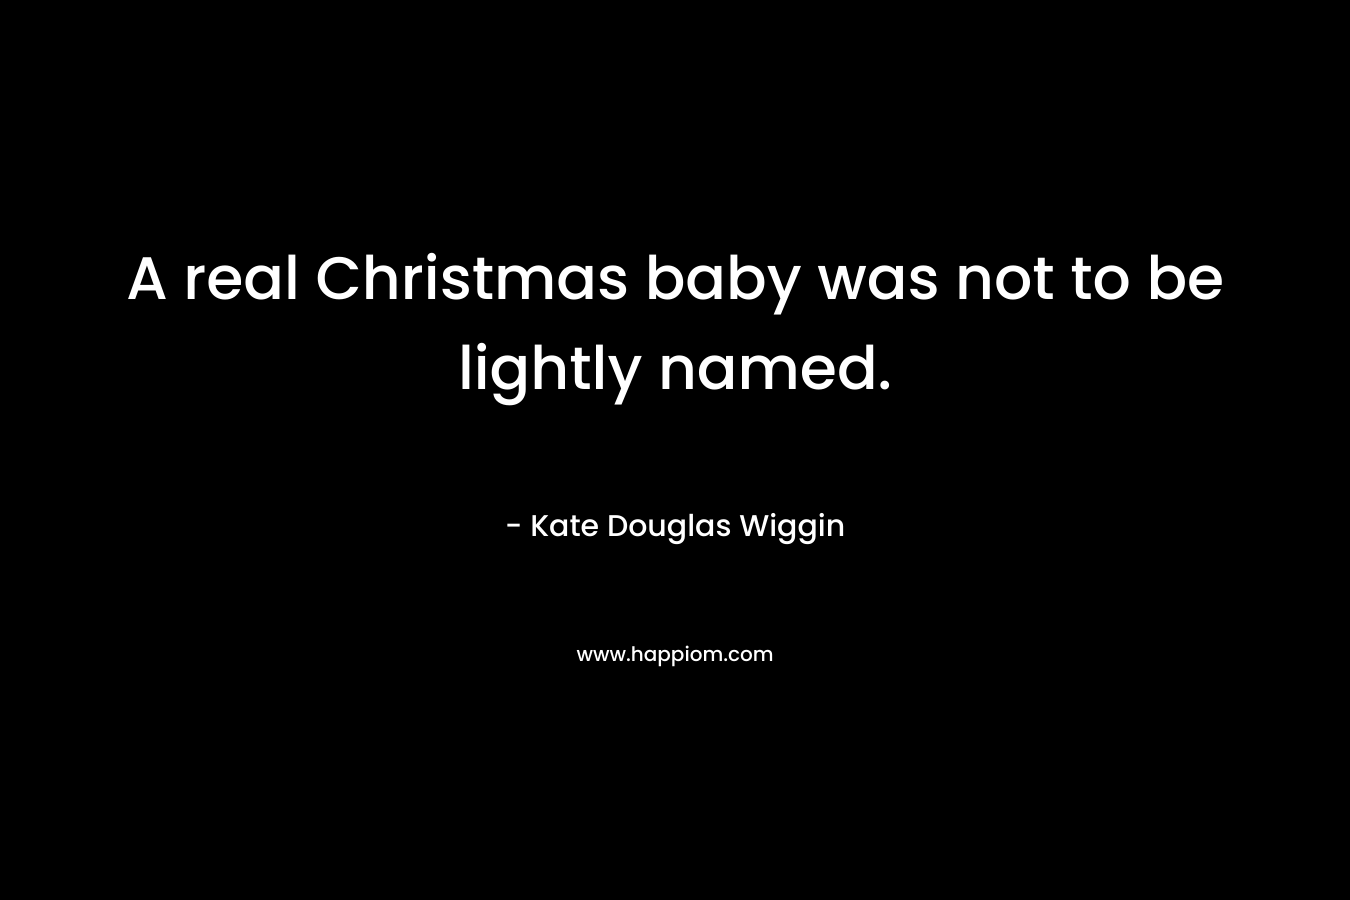 A real Christmas baby was not to be lightly named. – Kate Douglas Wiggin